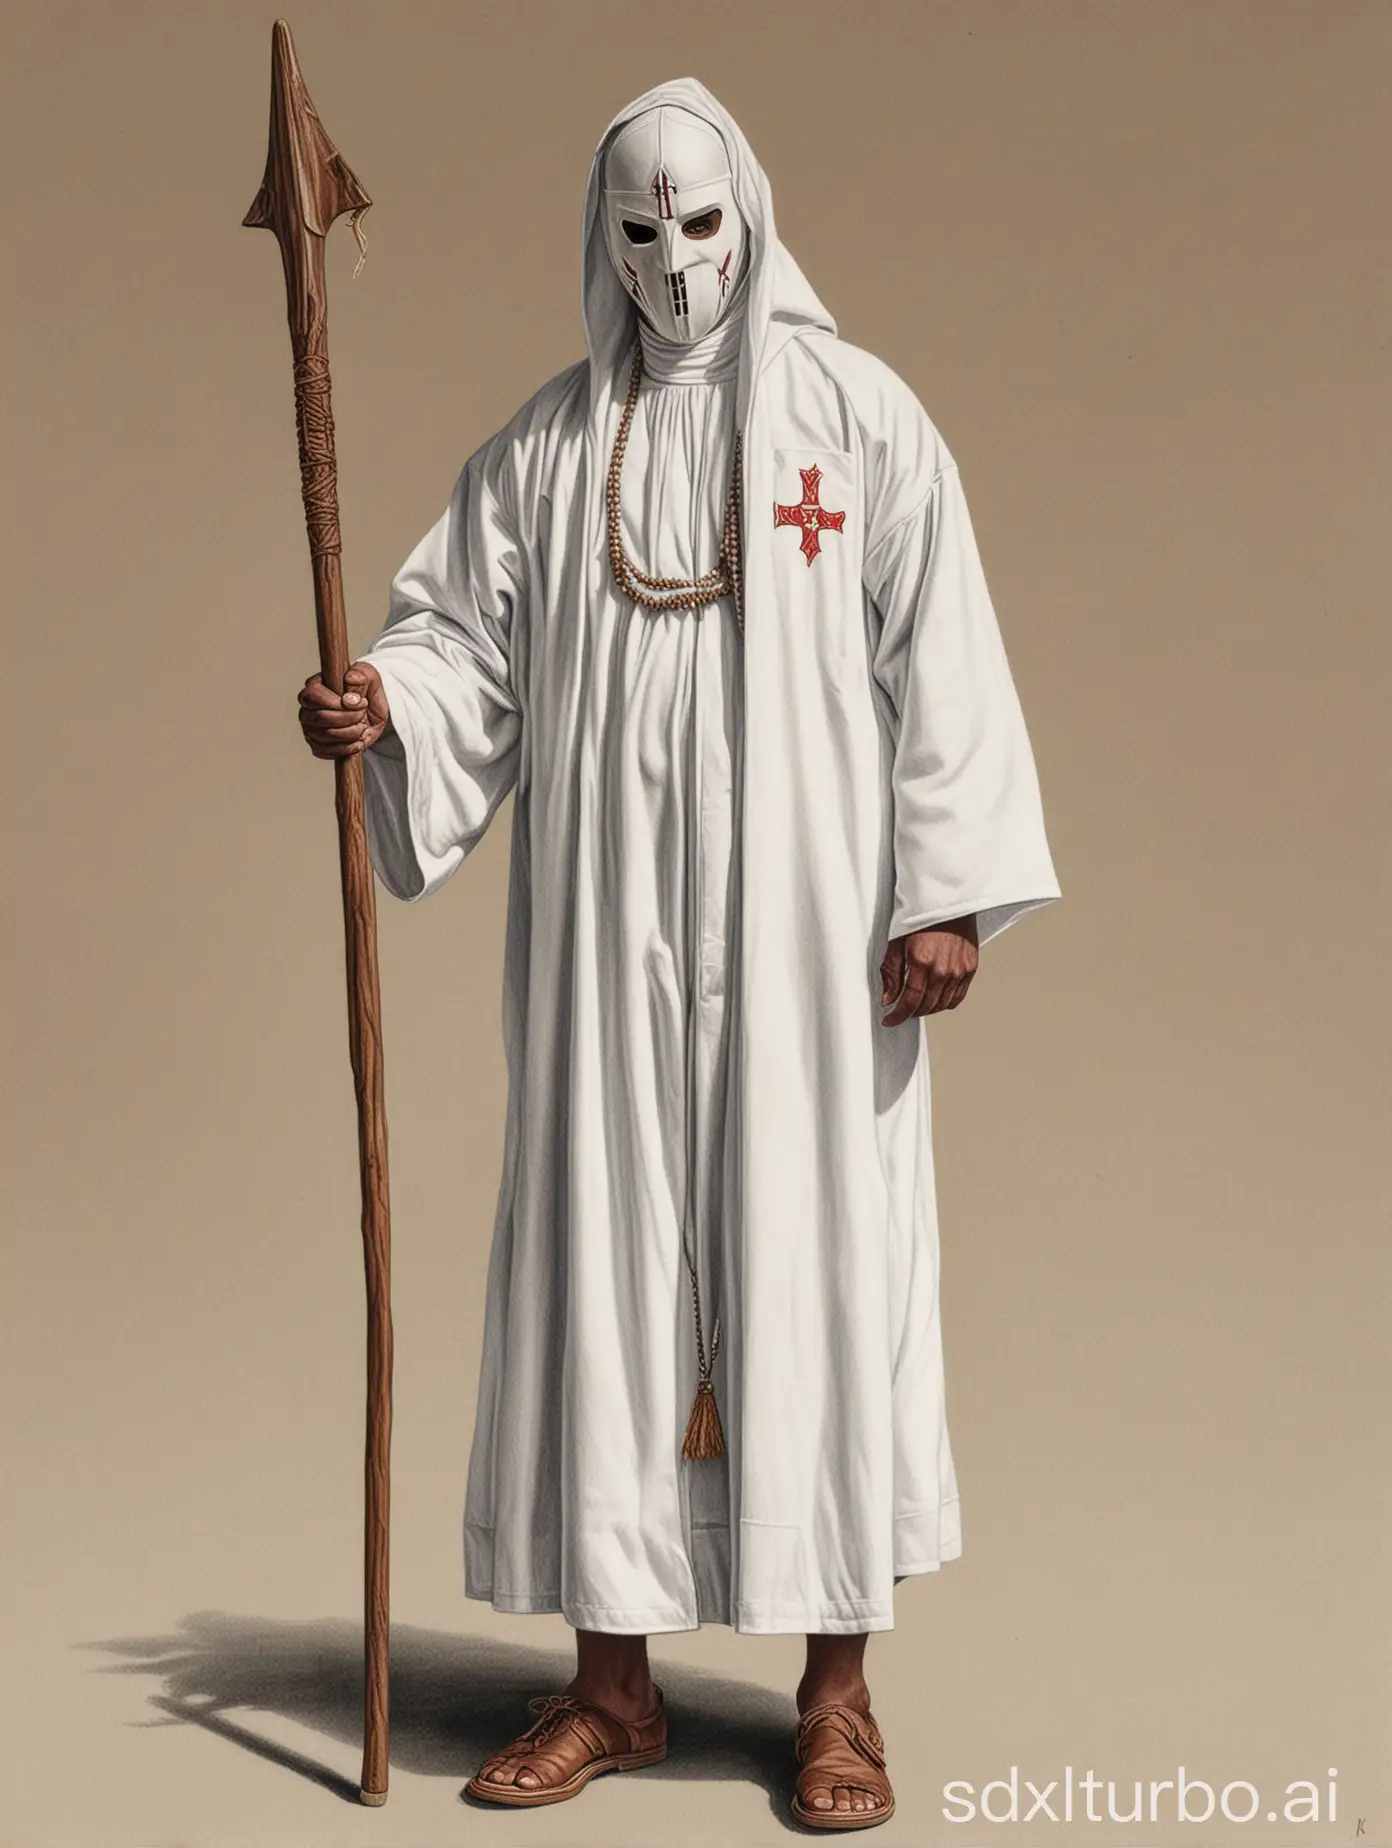 Ku-Klux-Klan-Member-in-Traditional-White-Robe-and-Mask-Colored-Pencil-Drawing